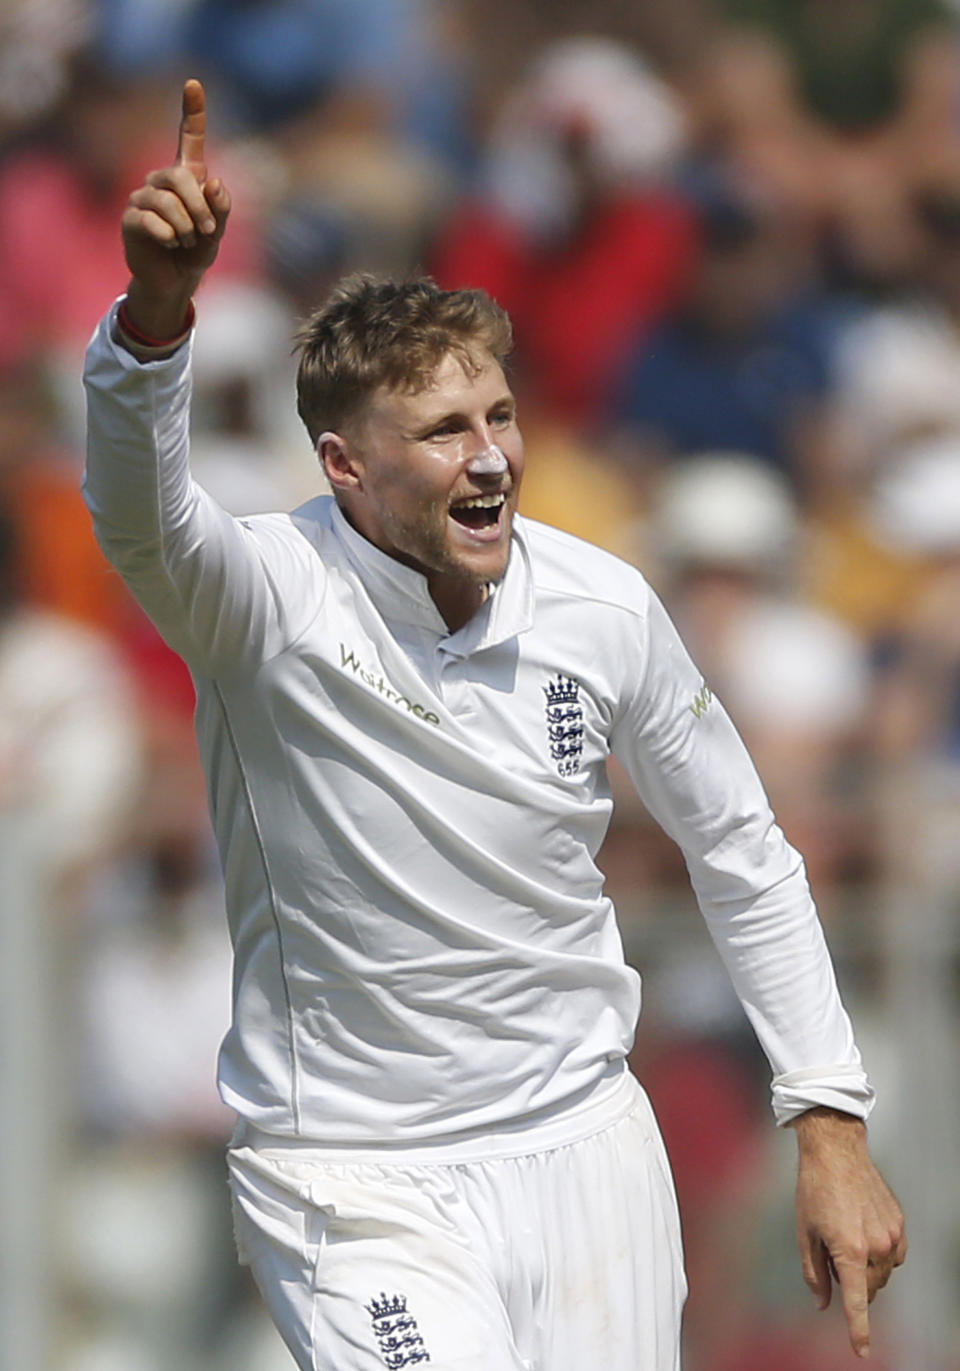 England's bowler Joe Root celebrates the wicket of Indian batsman Parthiv Patel on the third day of the fourth cricket test match between India and England in Mumbai, India, Saturday, Dec. 10, 2016. (AP Photo/Rafiq Maqbool)